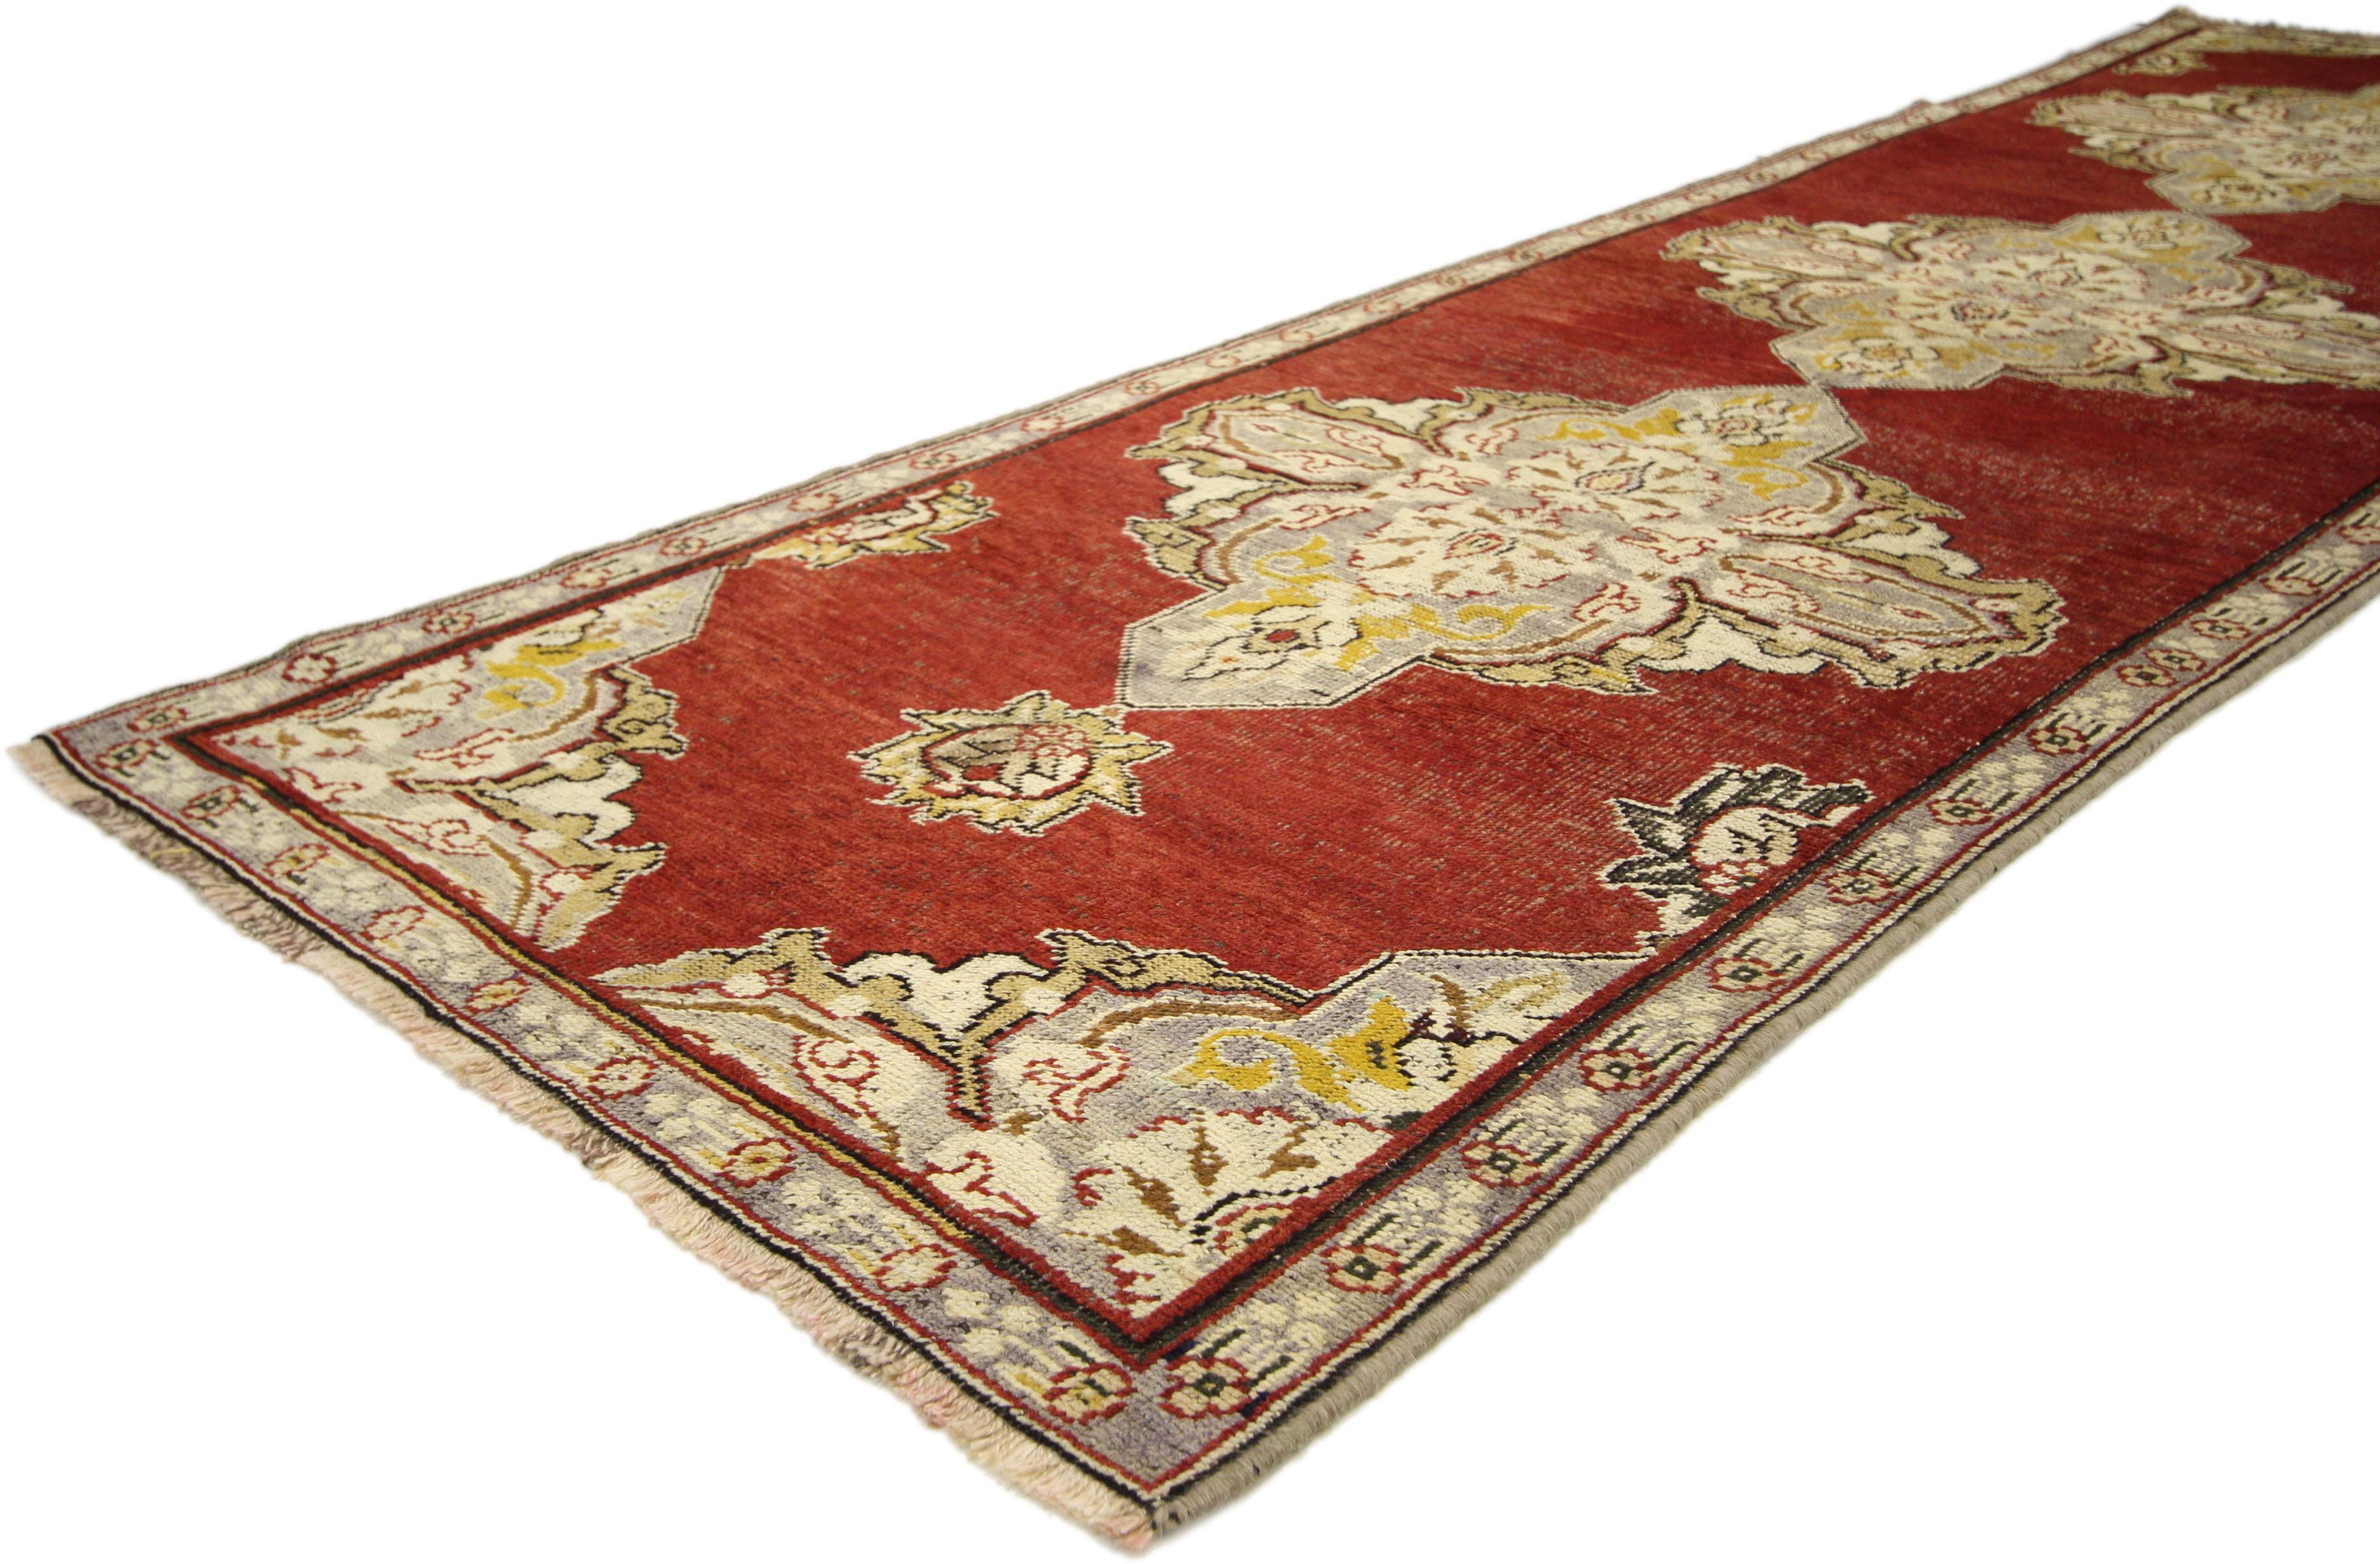 50227, Jacobean style antique Turkish Oushak Hallway runner. This hand knotted wool antique Turkish Oushak hallway runner features three intricate stylized amulet medallions in an abrashed field capped on the ends with two lush palmettes. The